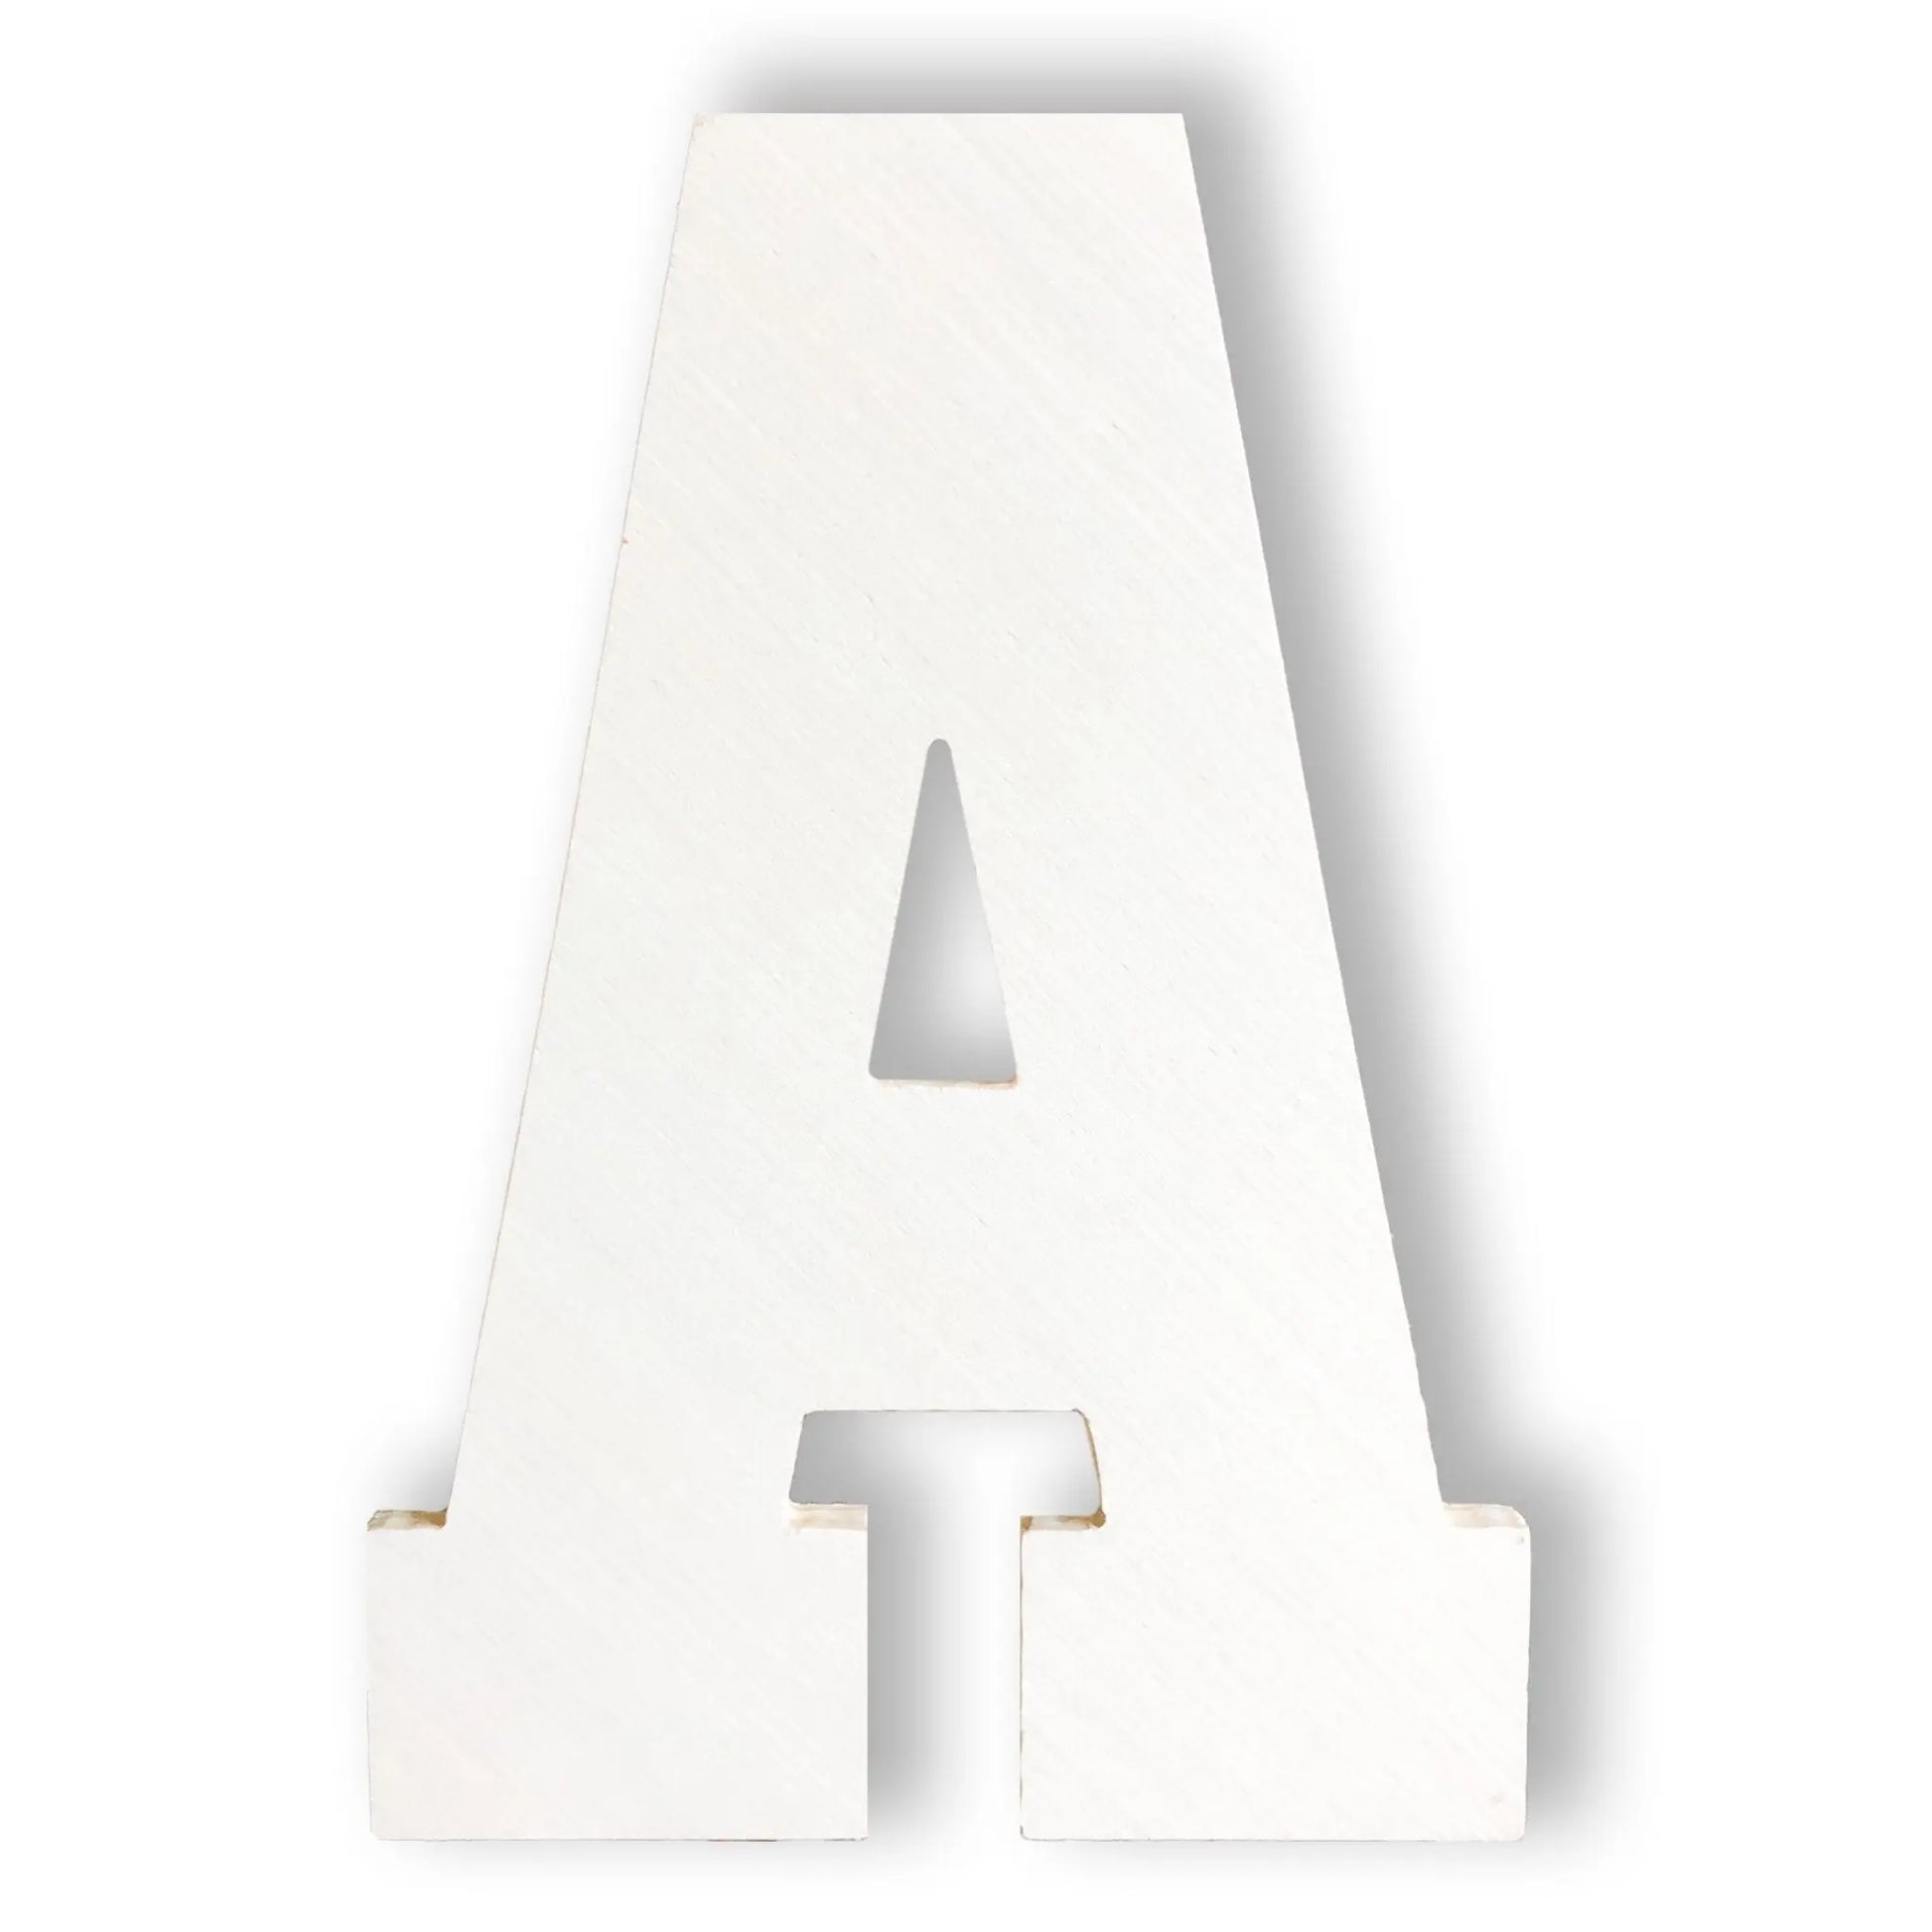 3/4 Inch Wood Letters or Numbers